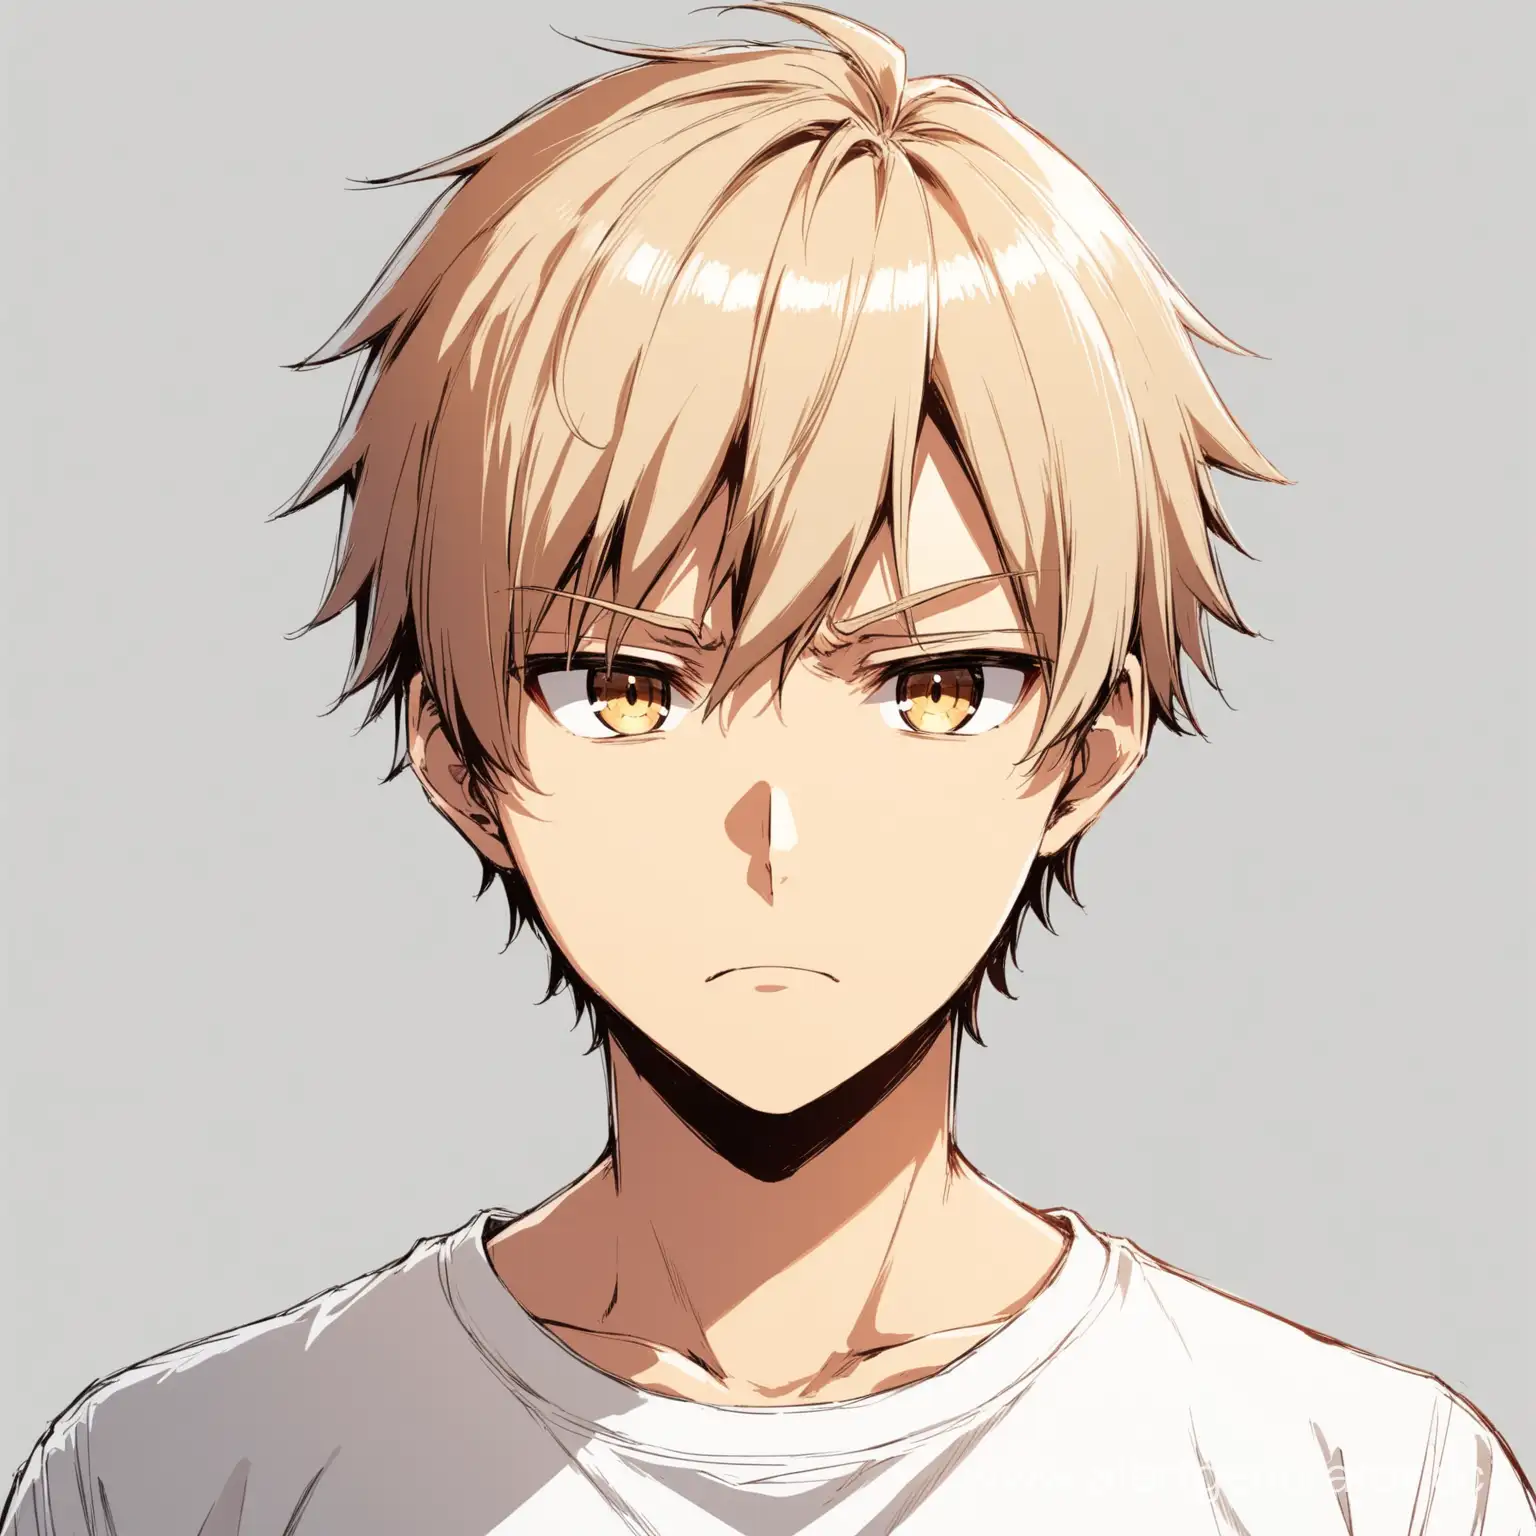 Cautious-Anime-Character-with-Short-Light-Hair-on-White-Background